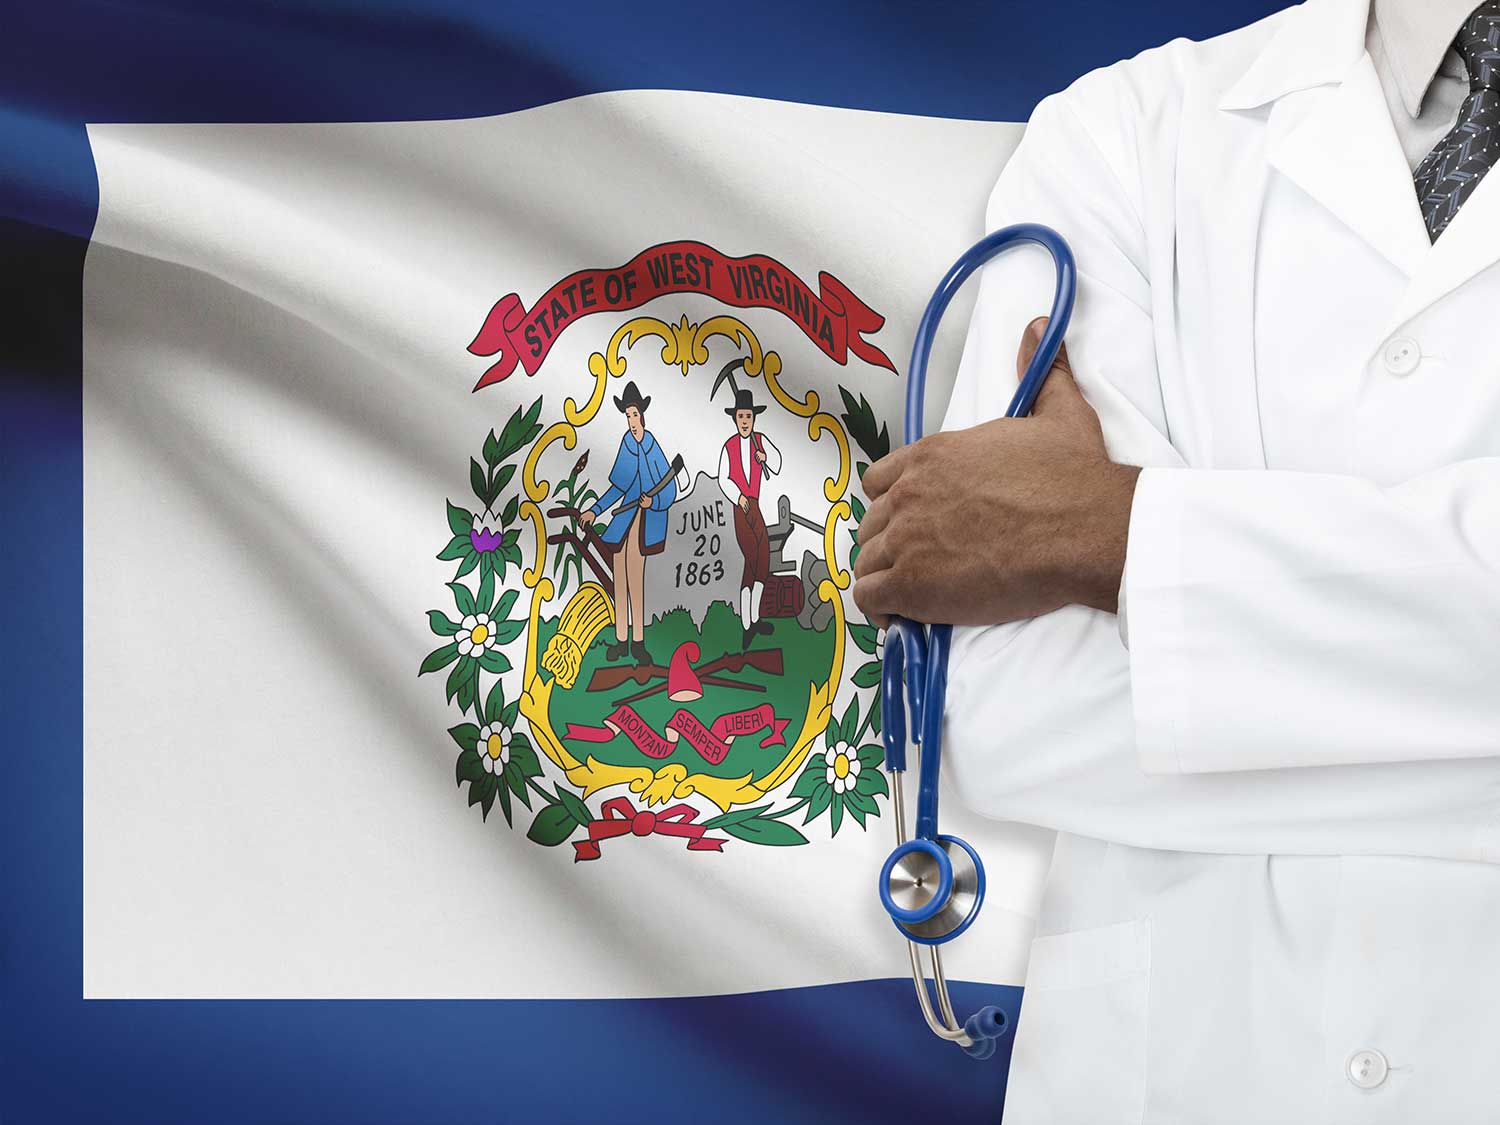 A West Virginia Doctor With Medical Malpractice Insurance Standing In Front Of The State Flag